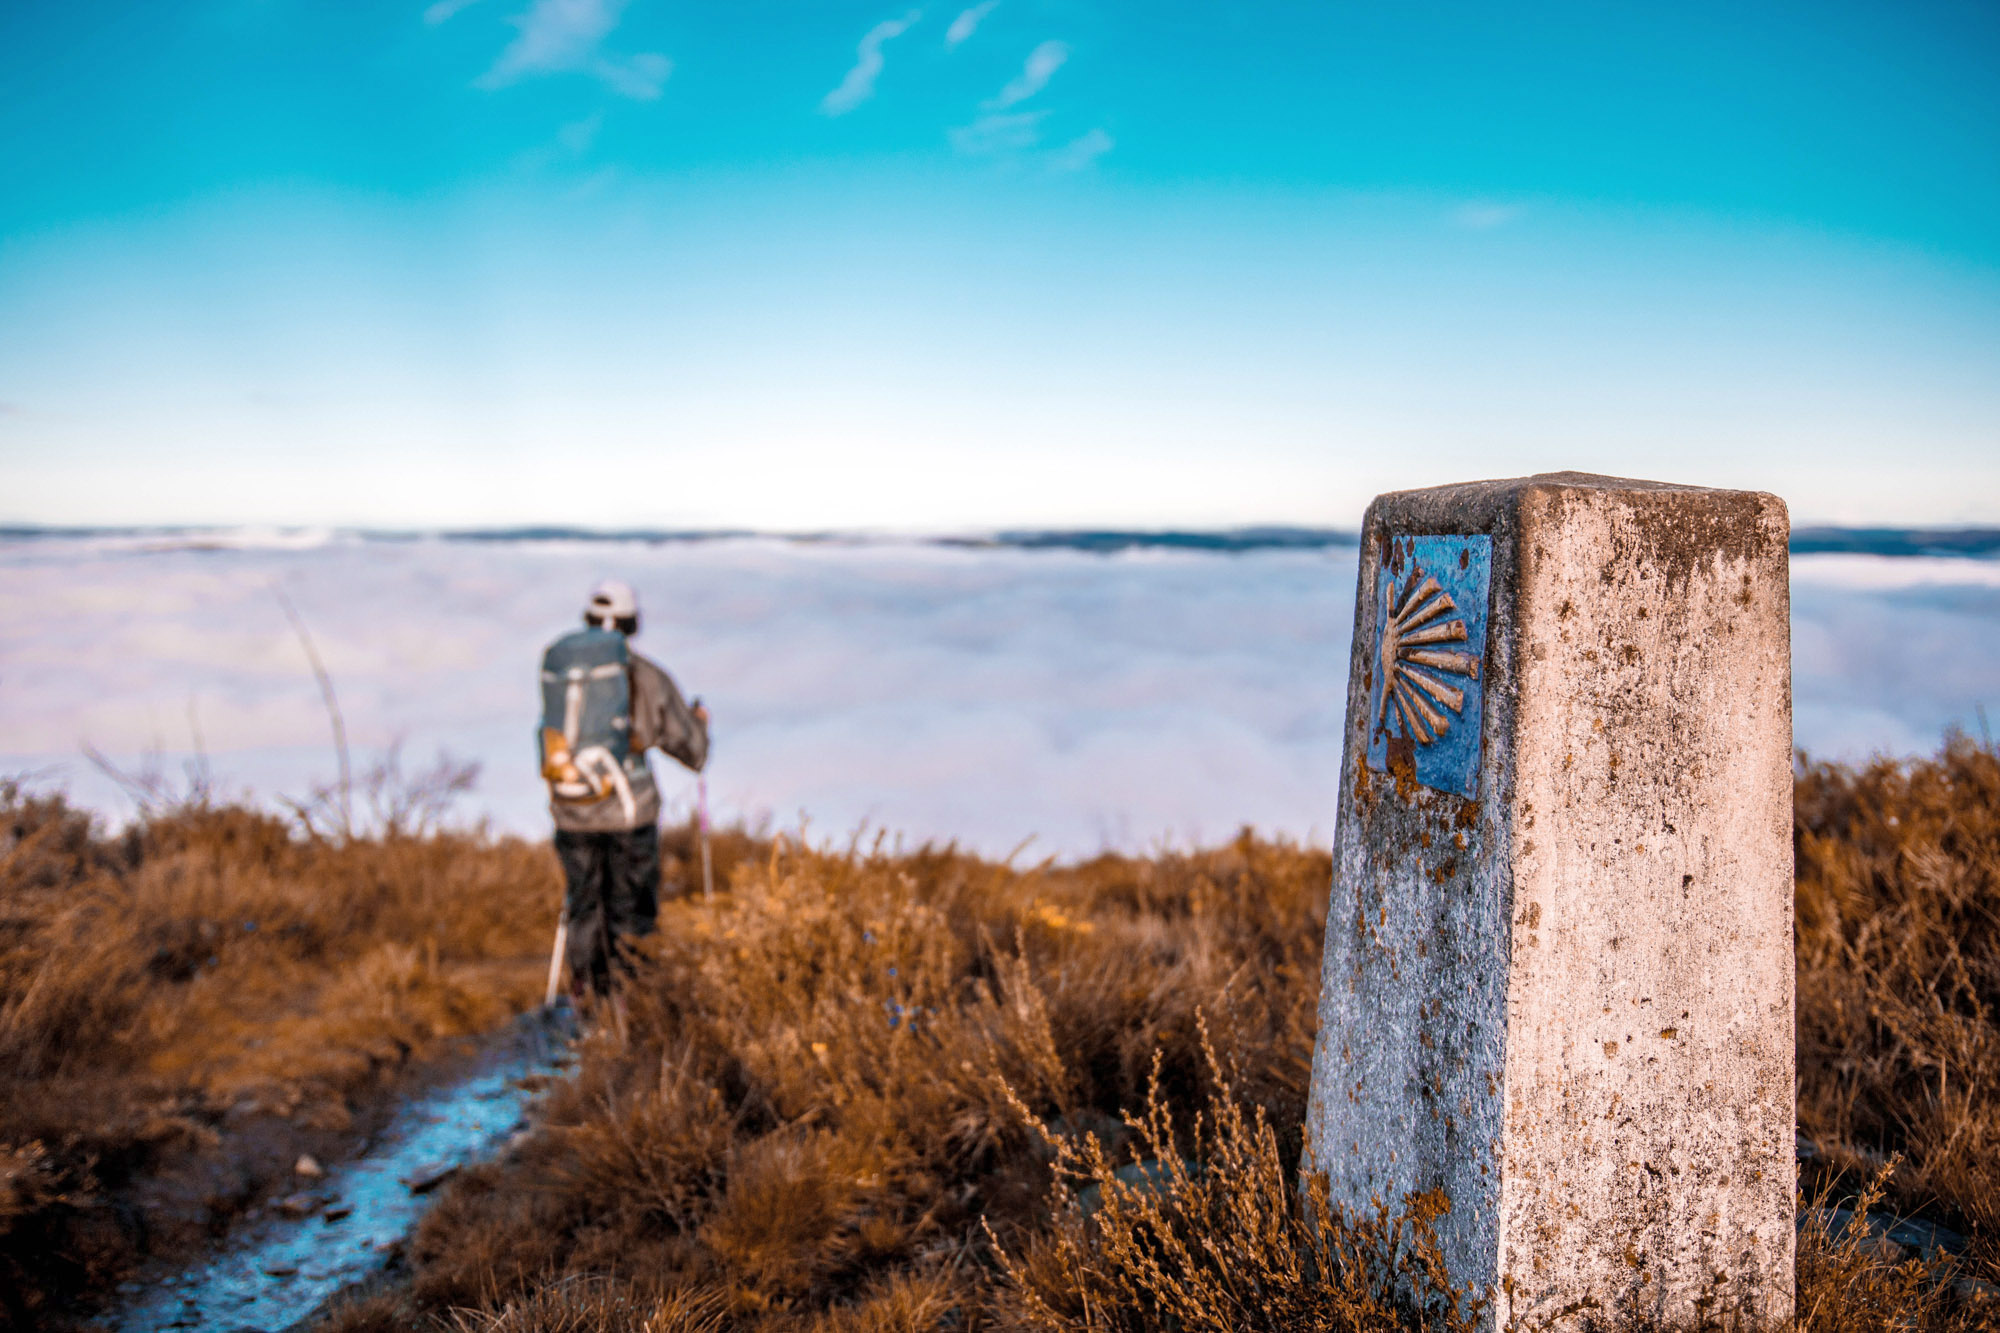 Pilgrim walking in Camino de Santiago, over a sea of clouds in the middle of the nature. We can see the icon of the shell.